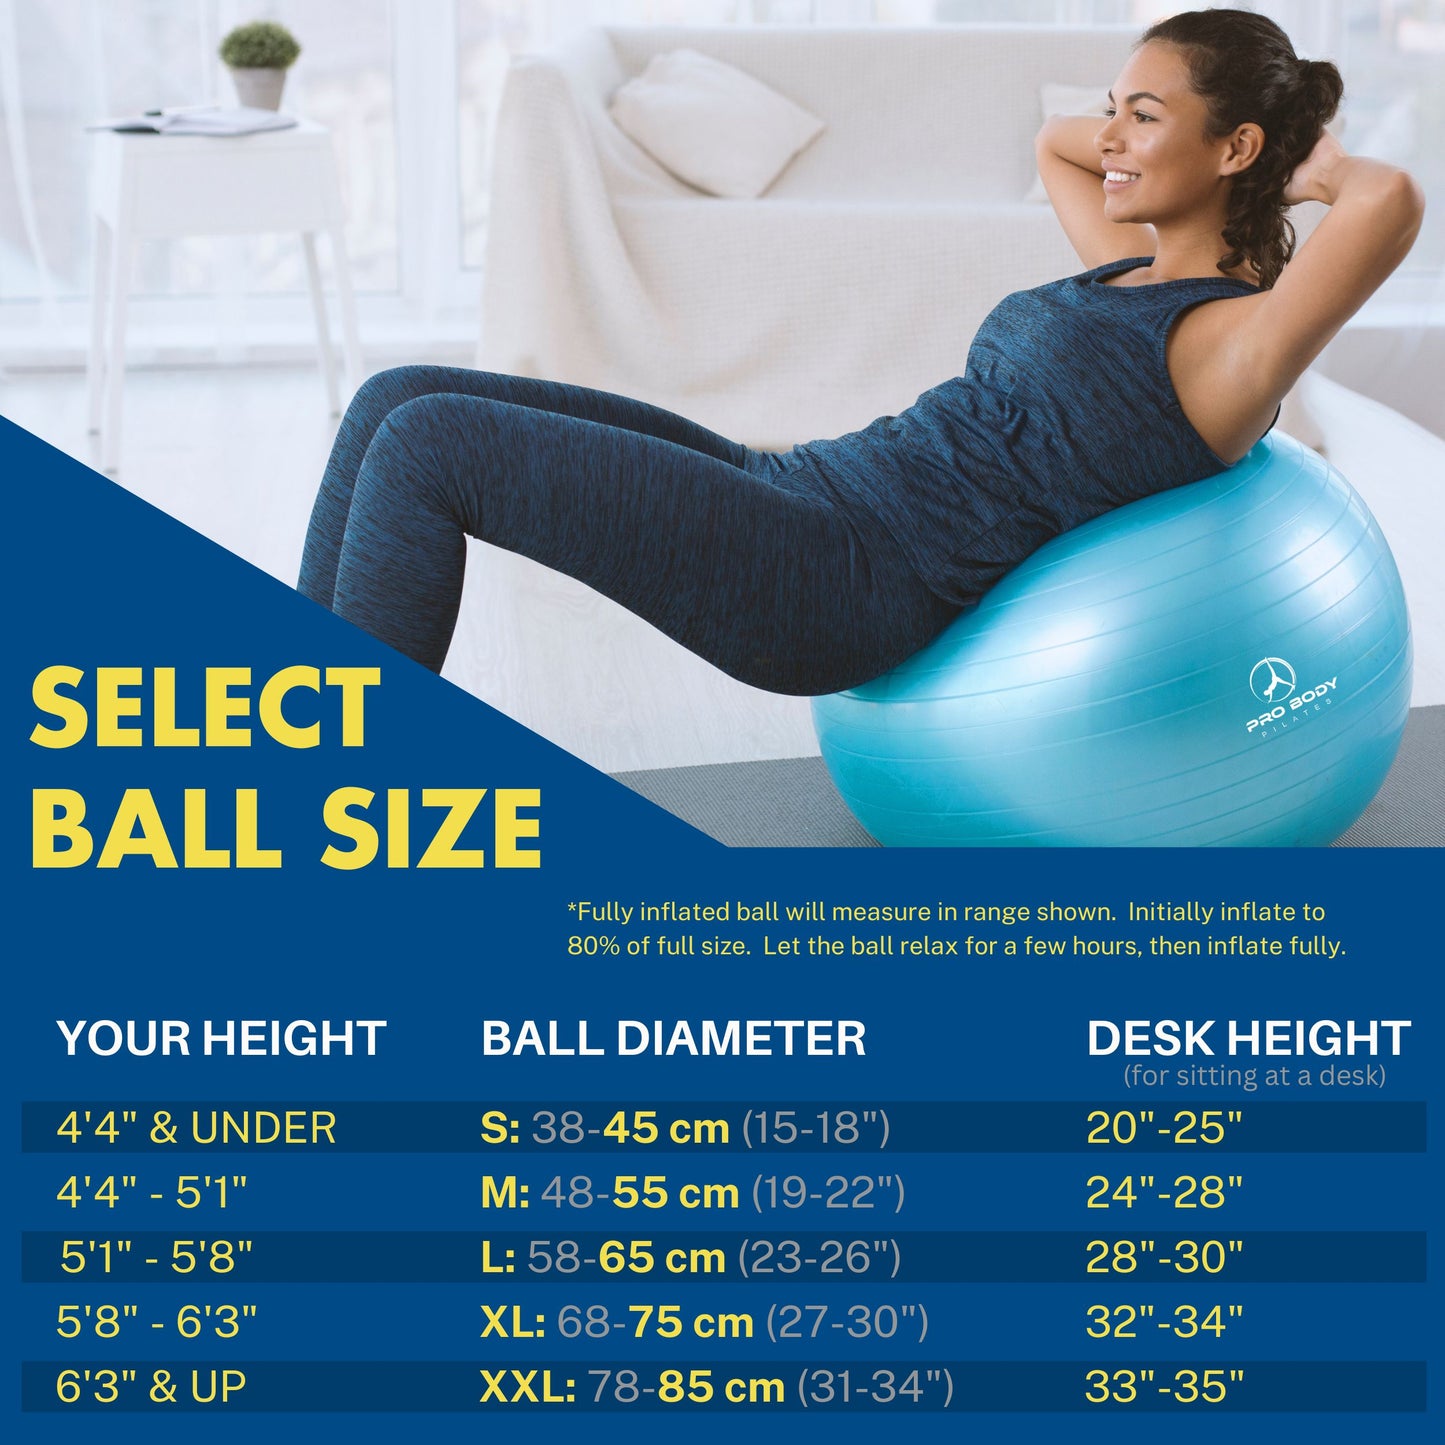 Yoga Ball for Pregnancy, Fitness, Balance, Workout at Home, Office and Physical Therapy (Slate)